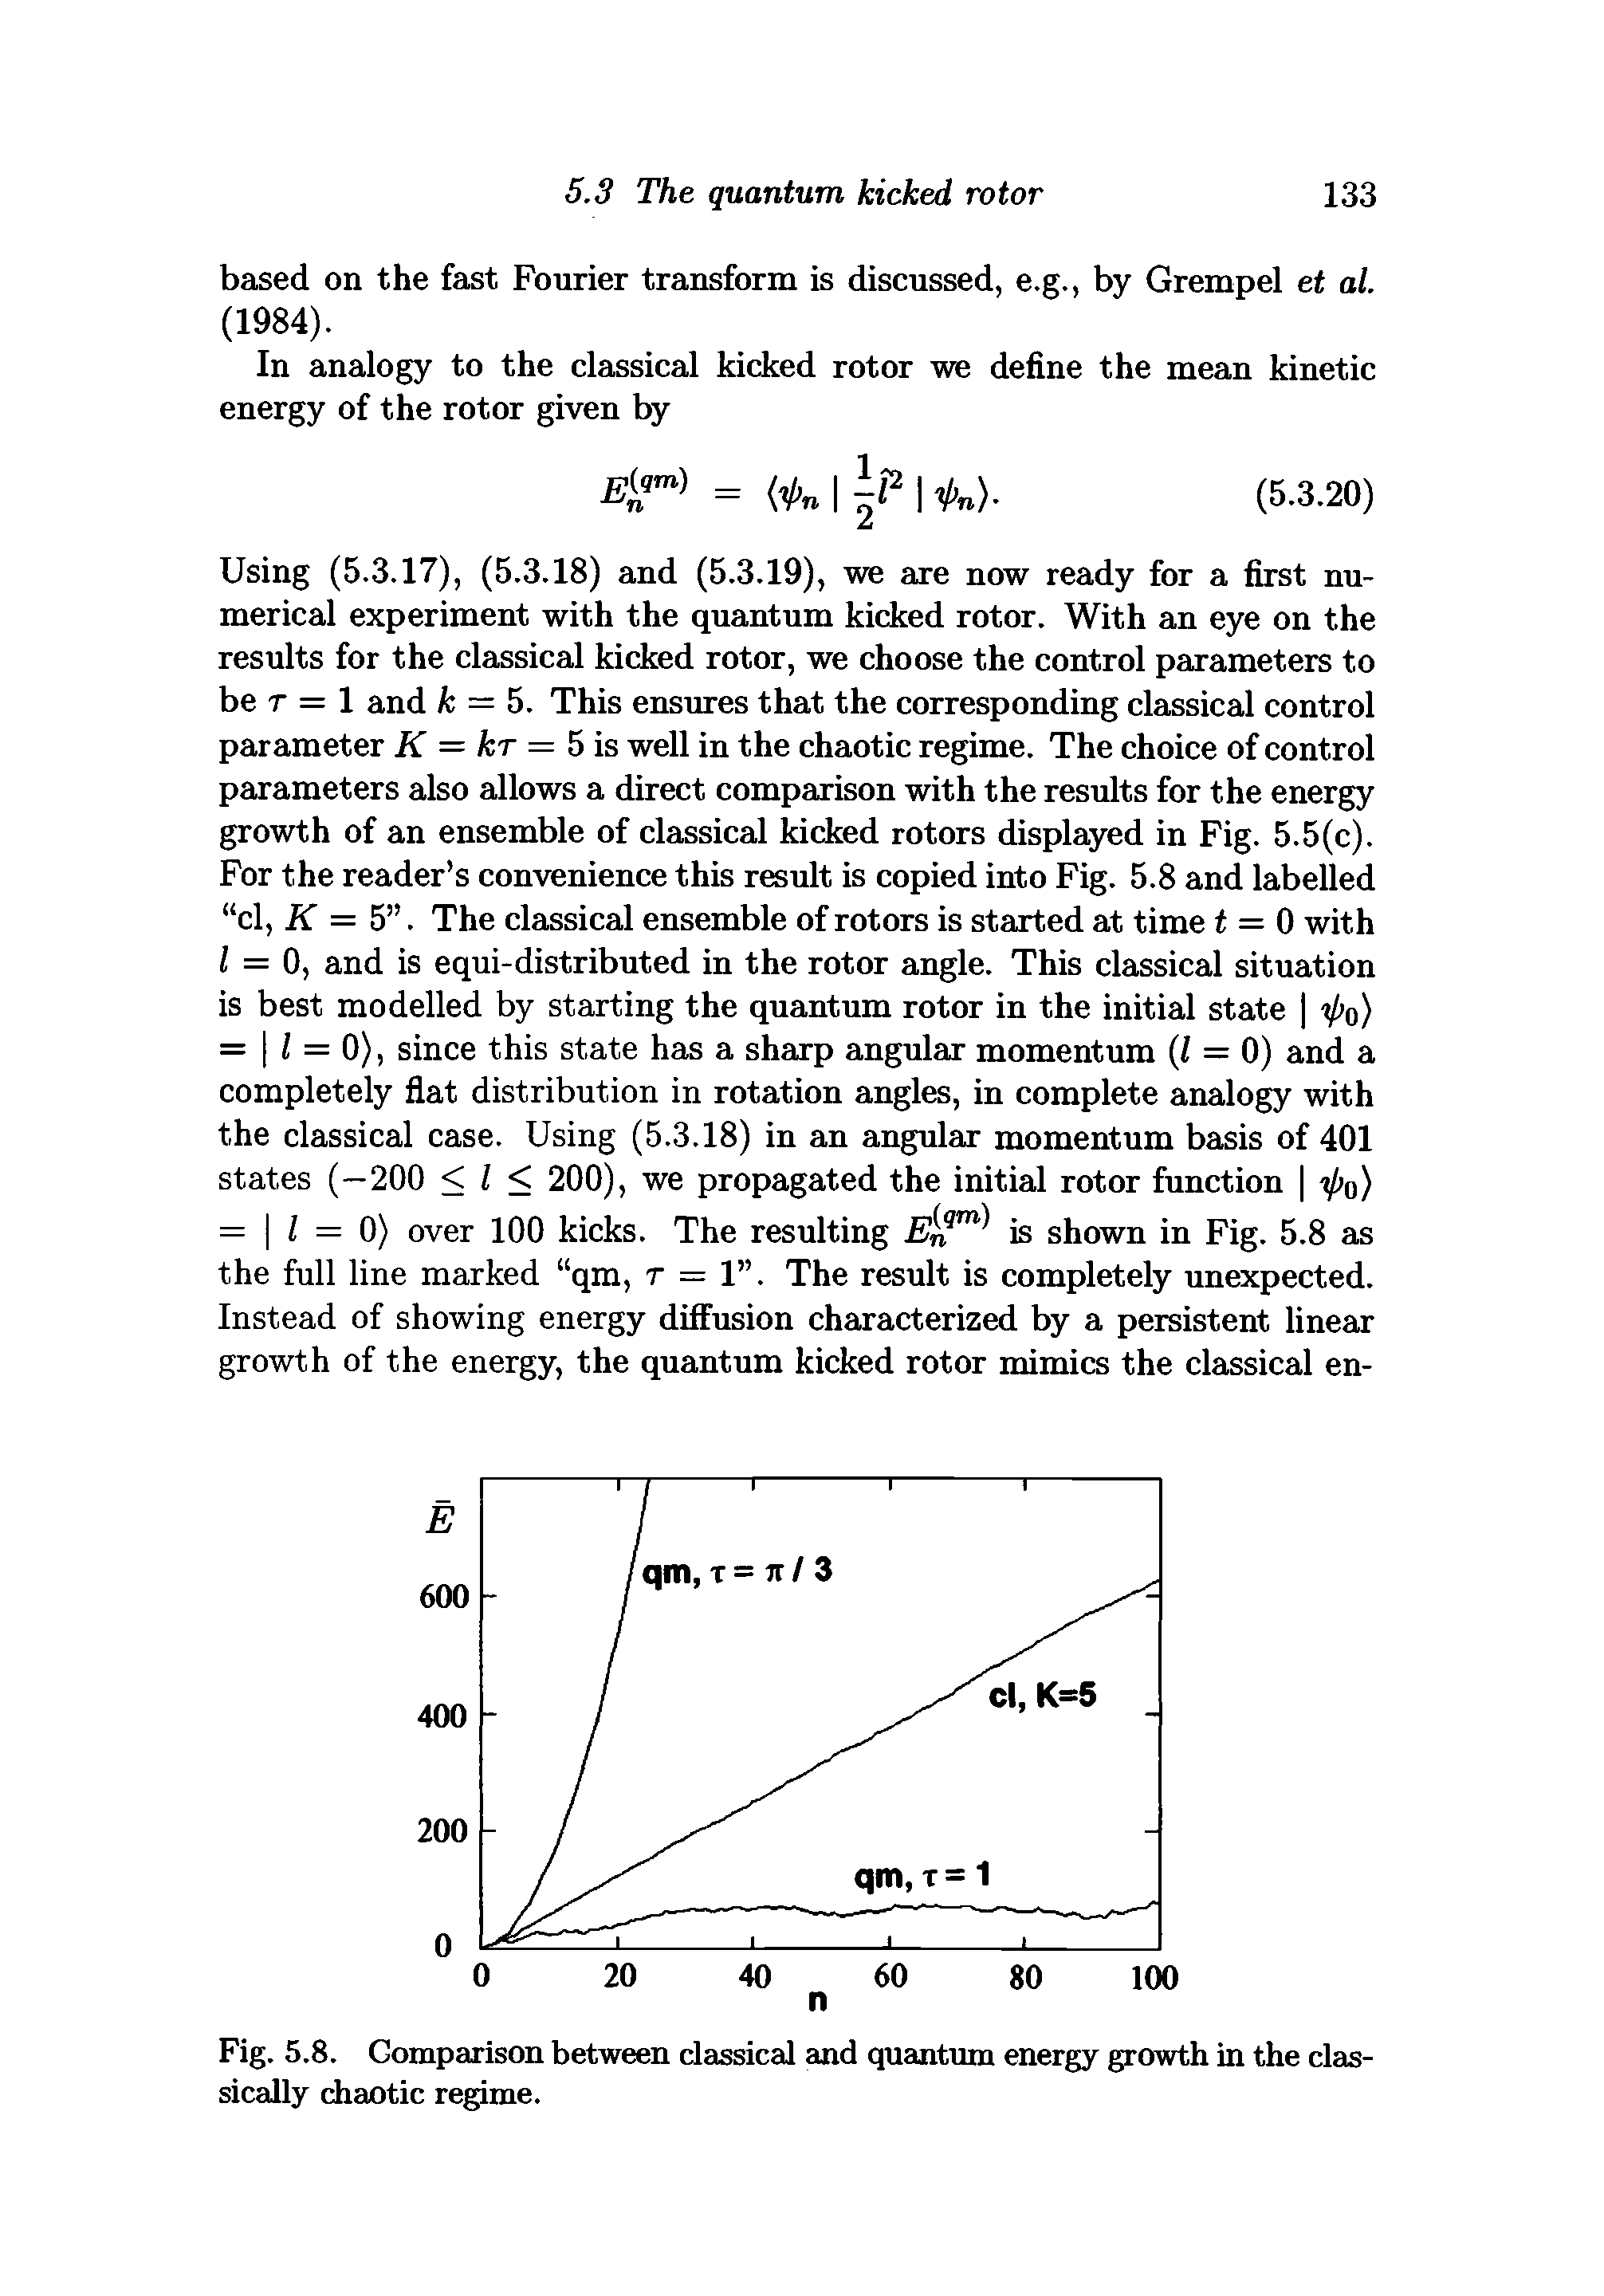 Fig. 5.8. Comparison between classical and quantum energy growth in the classically chaotic regime.